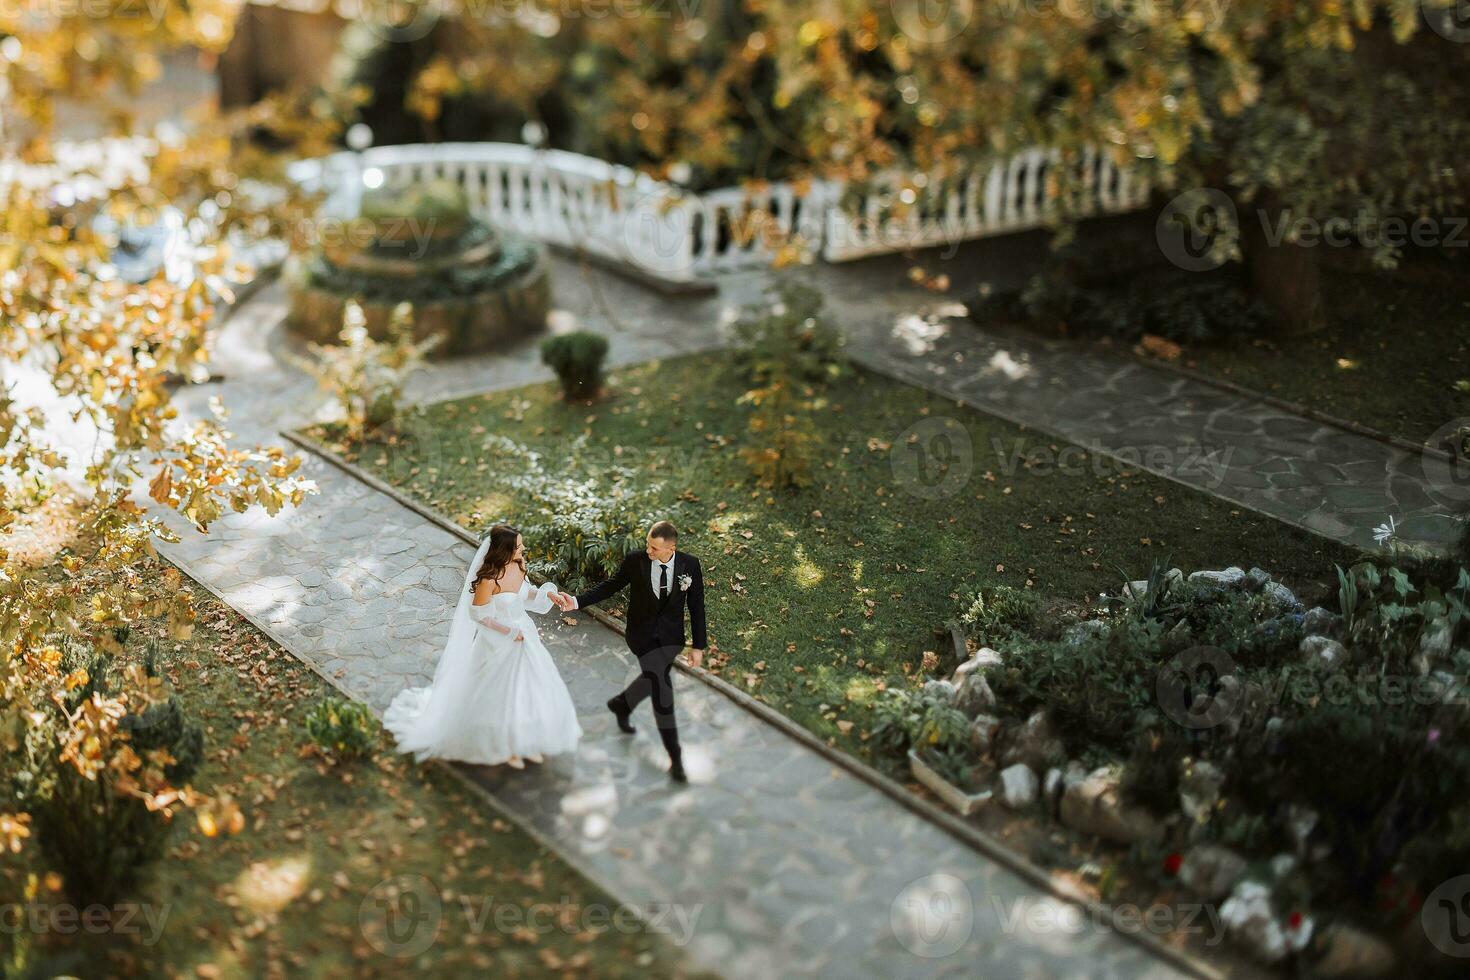 young beautiful wedding couple holding hands walking in the garden, photo shot from above, shot on TS-E system lens